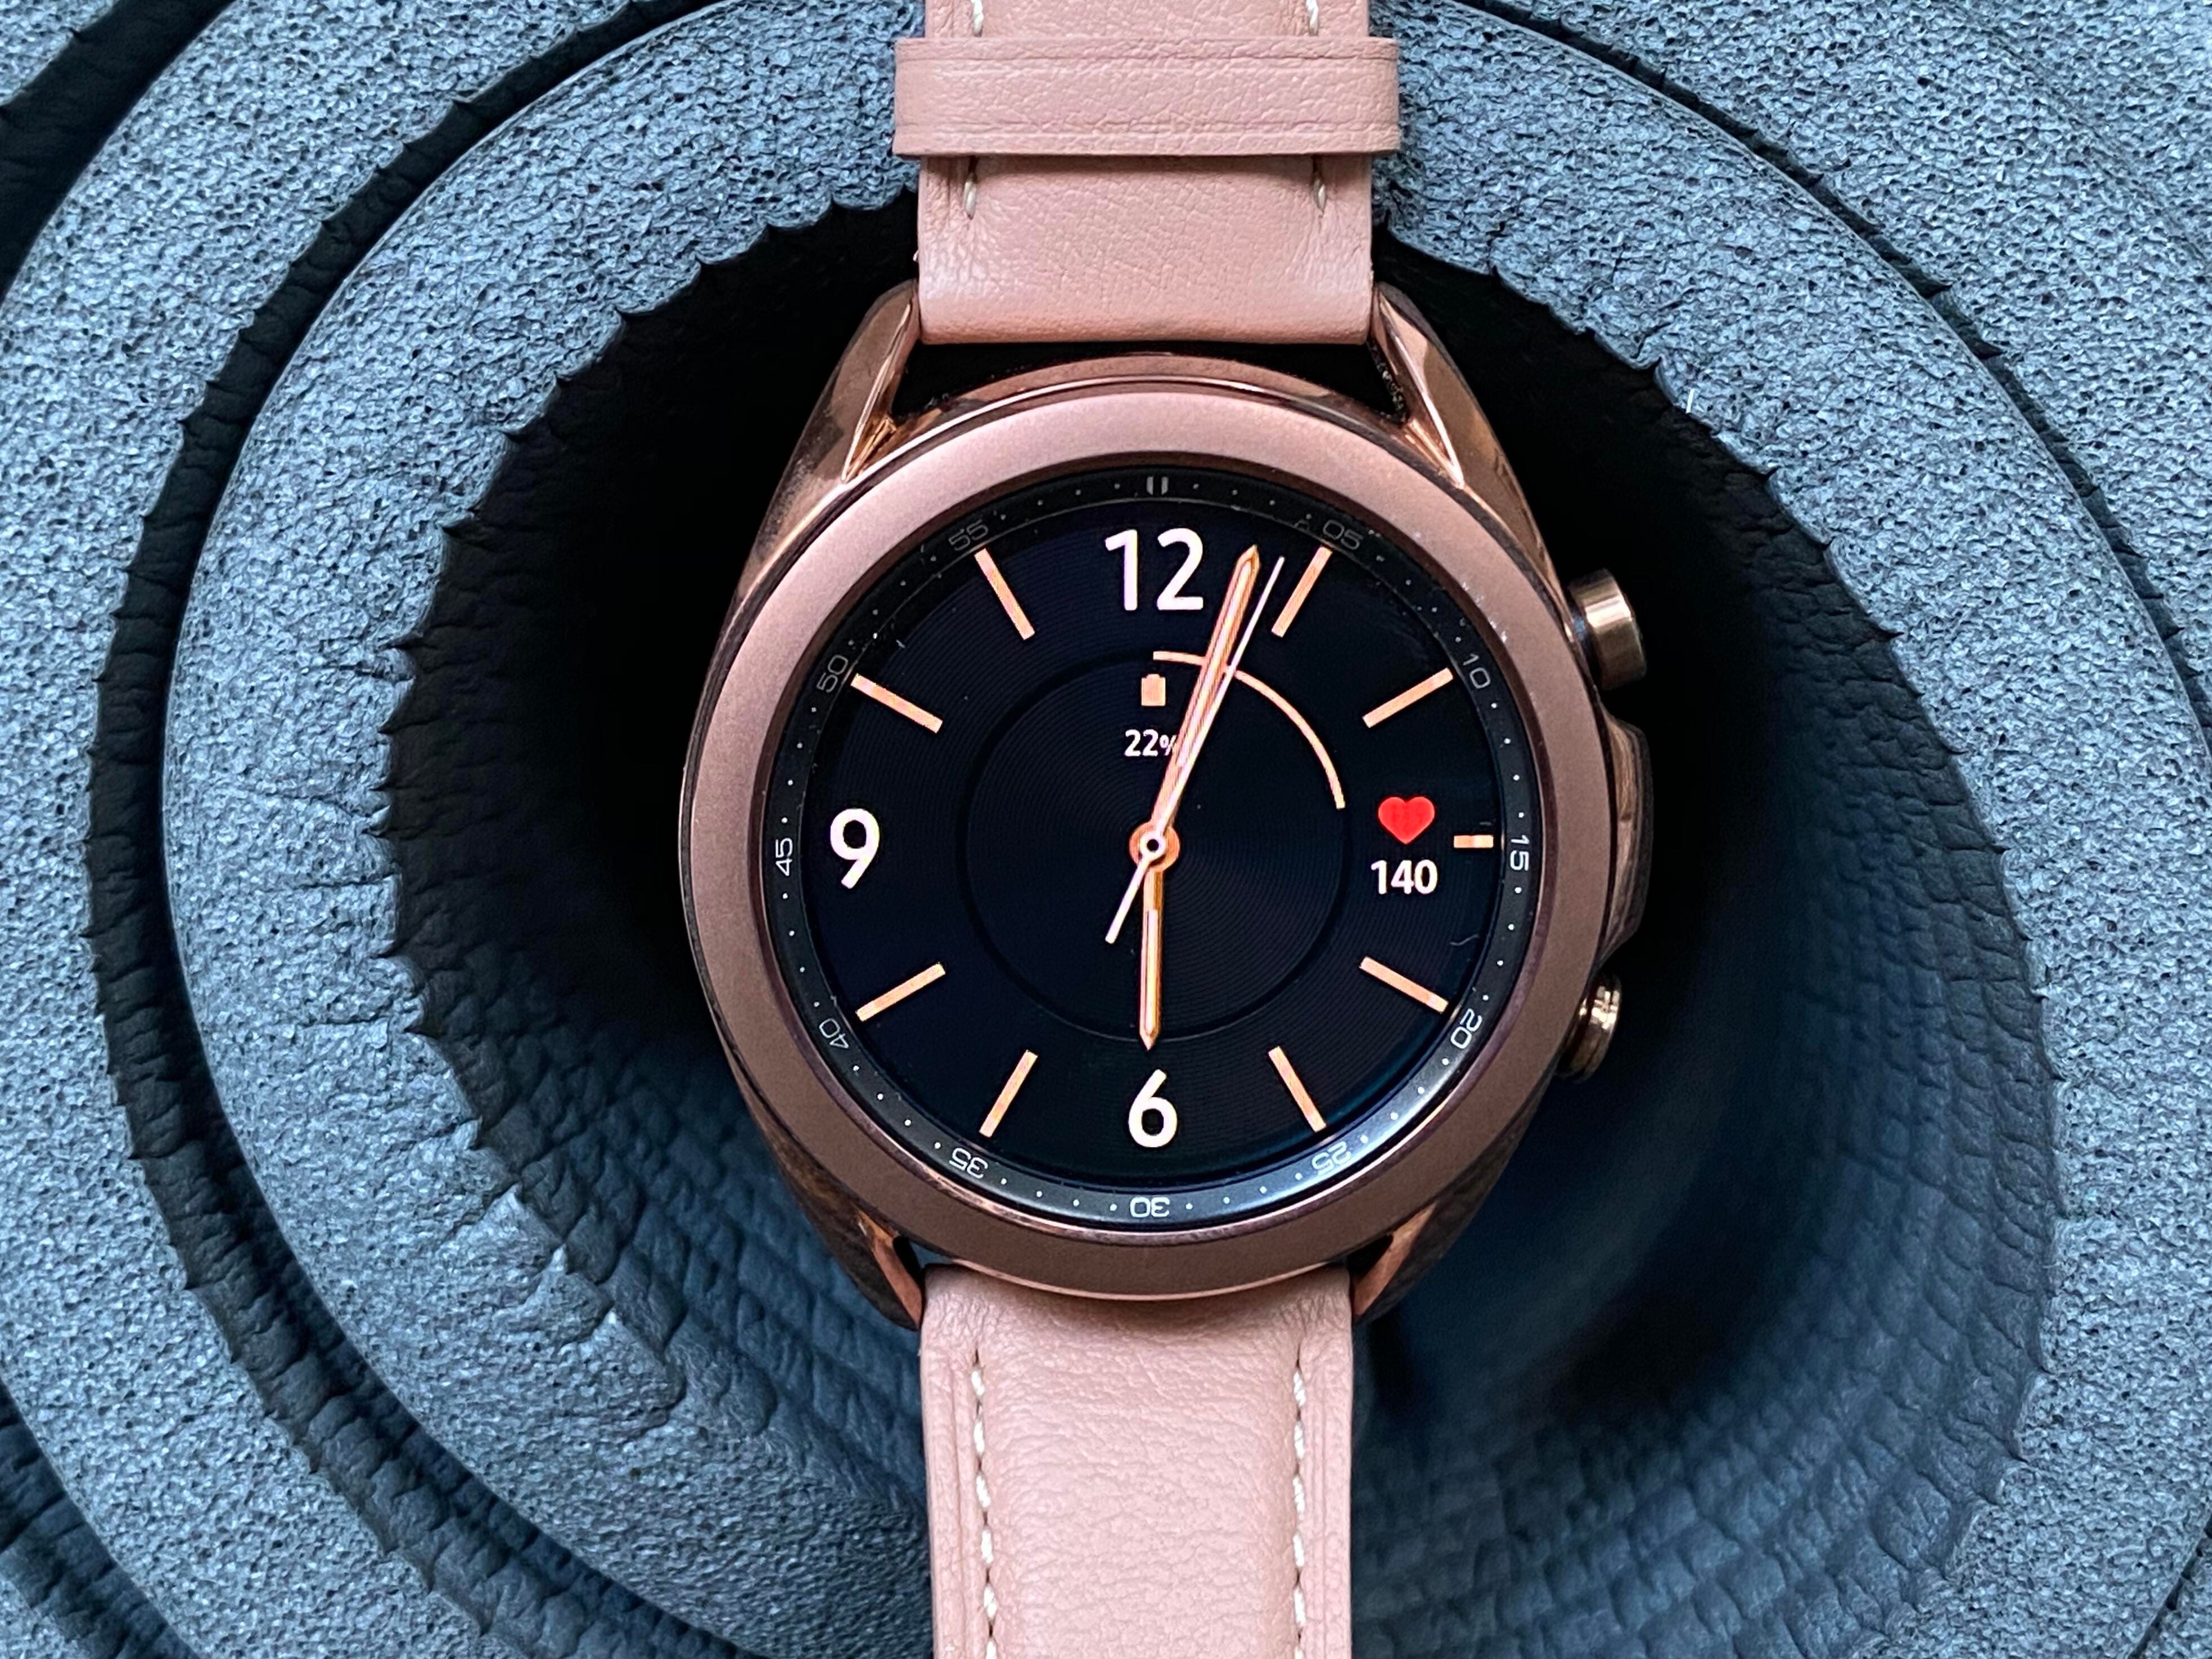 Donker worden Stoffig Magnetisch Galaxy Watch 3 review: A stunning smartwatch with SpO2 tracking and ECG -  CNET